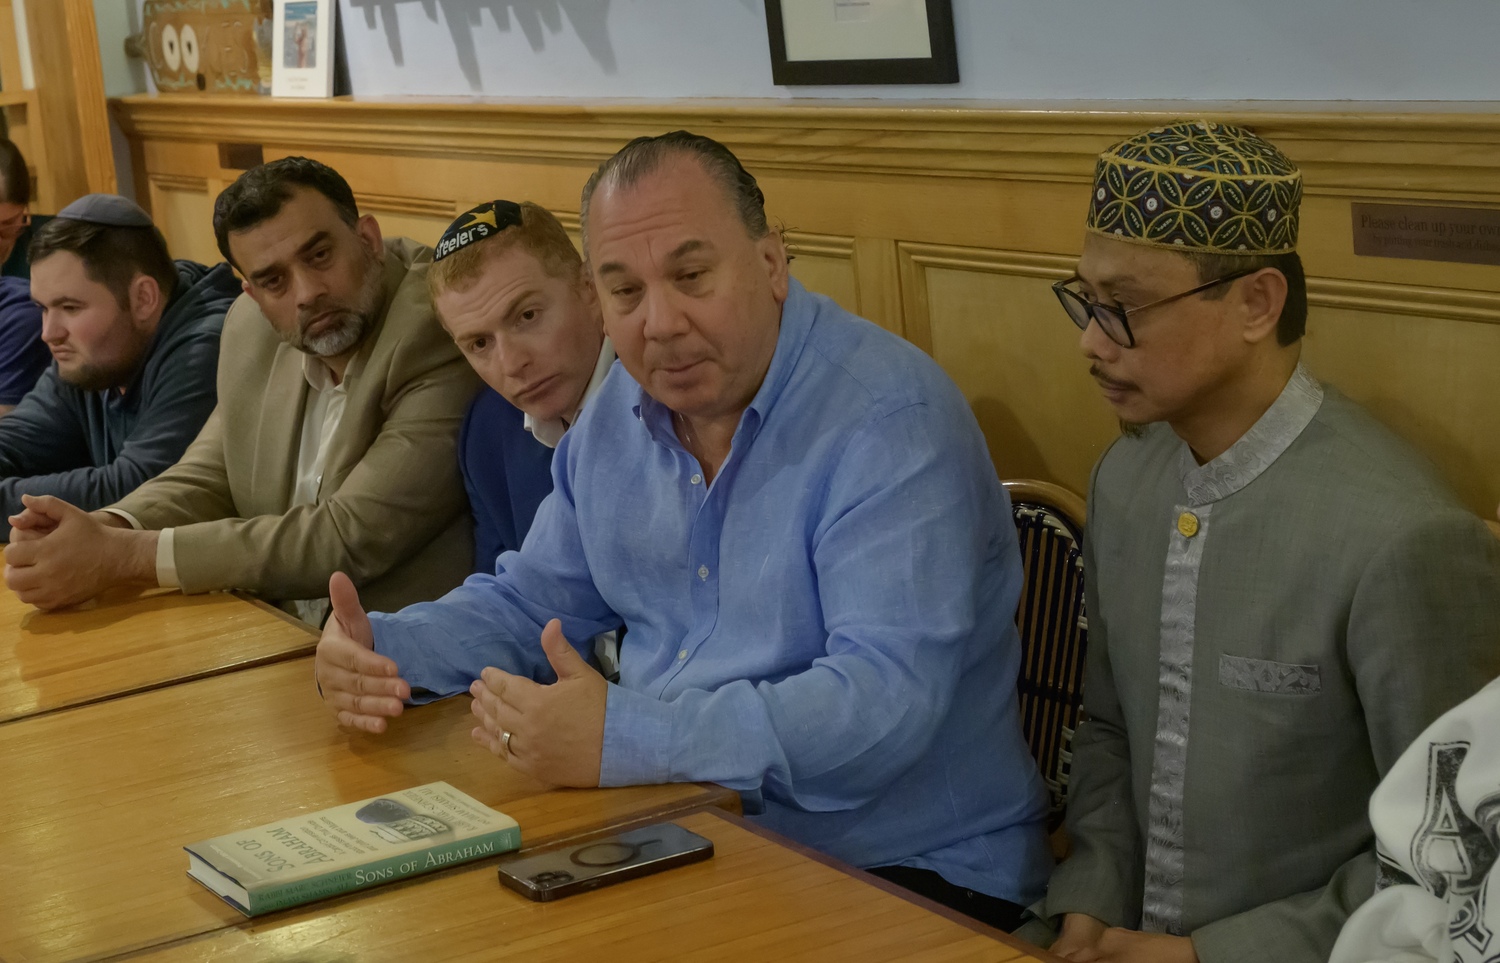 Rabbi Marc Schneier of Hampton Synagogue and Imam Shamsi Ali of the Jamaican Muslim Center in Queens met with 30 Jewish student leaders over the weekend at Beach Bakery in Westhampton Beach to discuss ways to combat hatred, violence and anti-Semitism that has been on the rise against the backdrop of the war in Gaza. RICK SEIGLEMAN